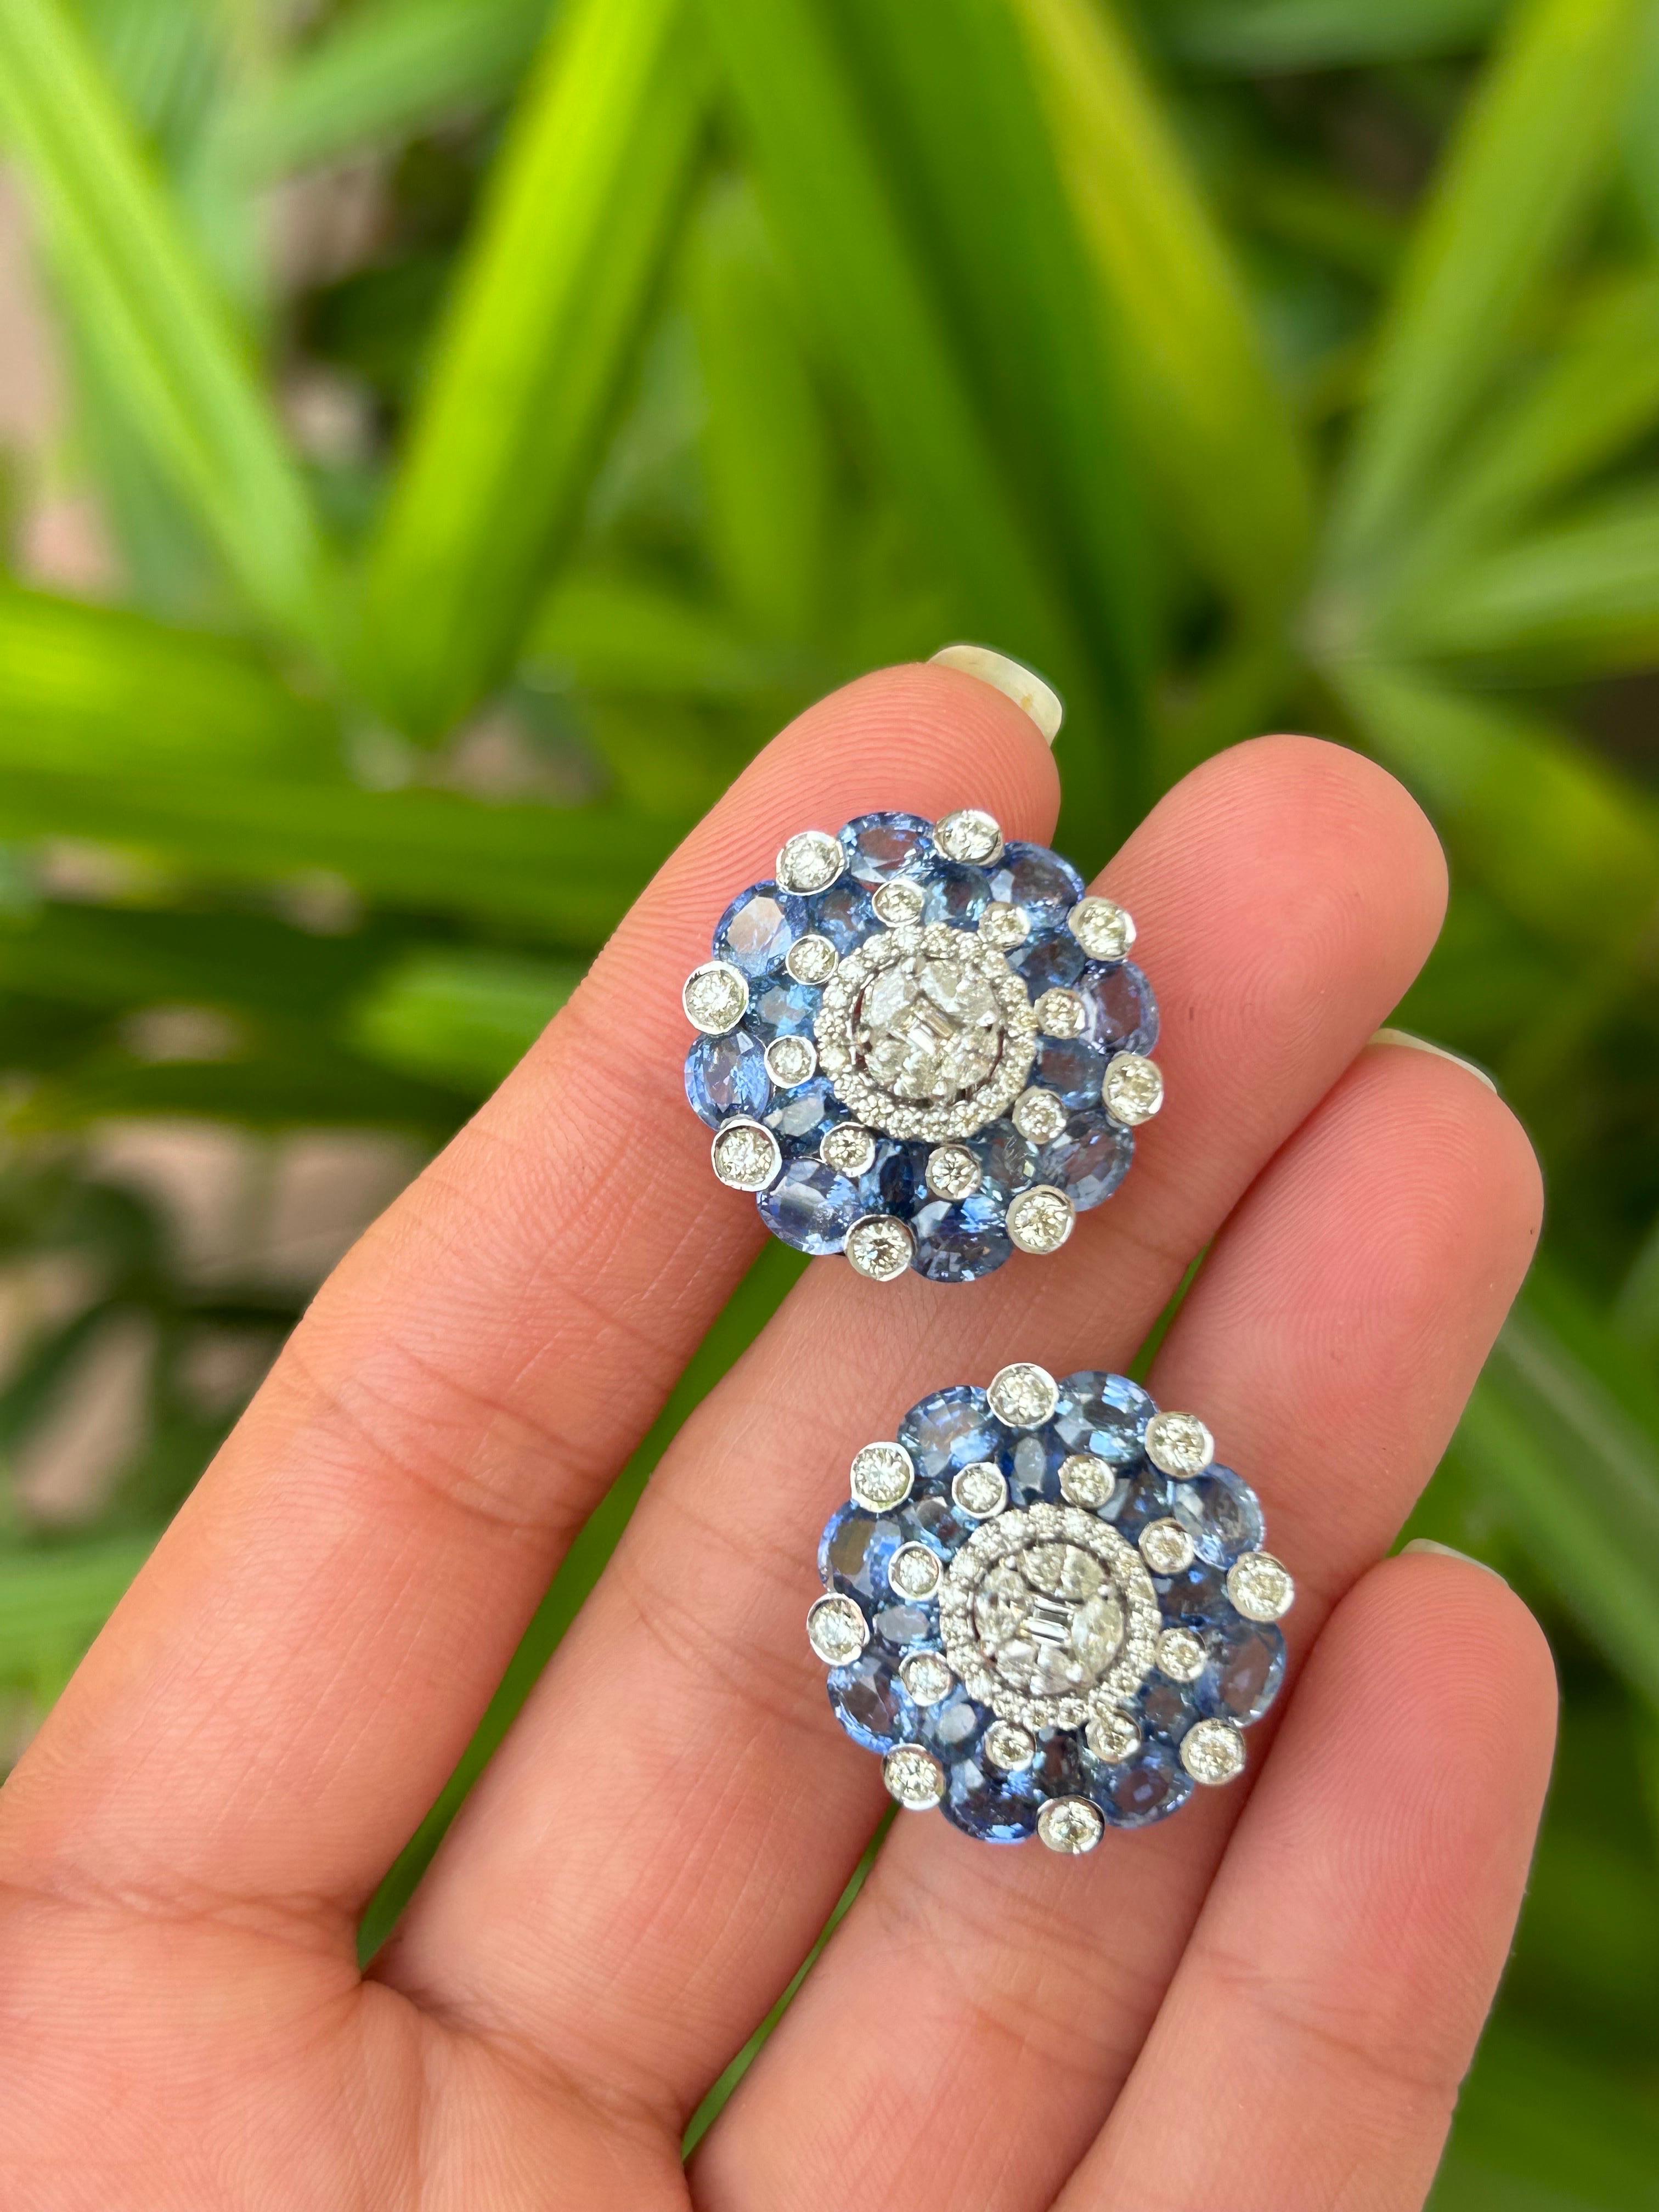 A beautifully crafted 17.28 carat natural oval cut Sapphire and 3.25 carat VS/SI quality Diamond earring and ring suite. 
The blue sapphires are transparent with great luster and beautiful blue color, with no inclusions, comes with an omega clip for